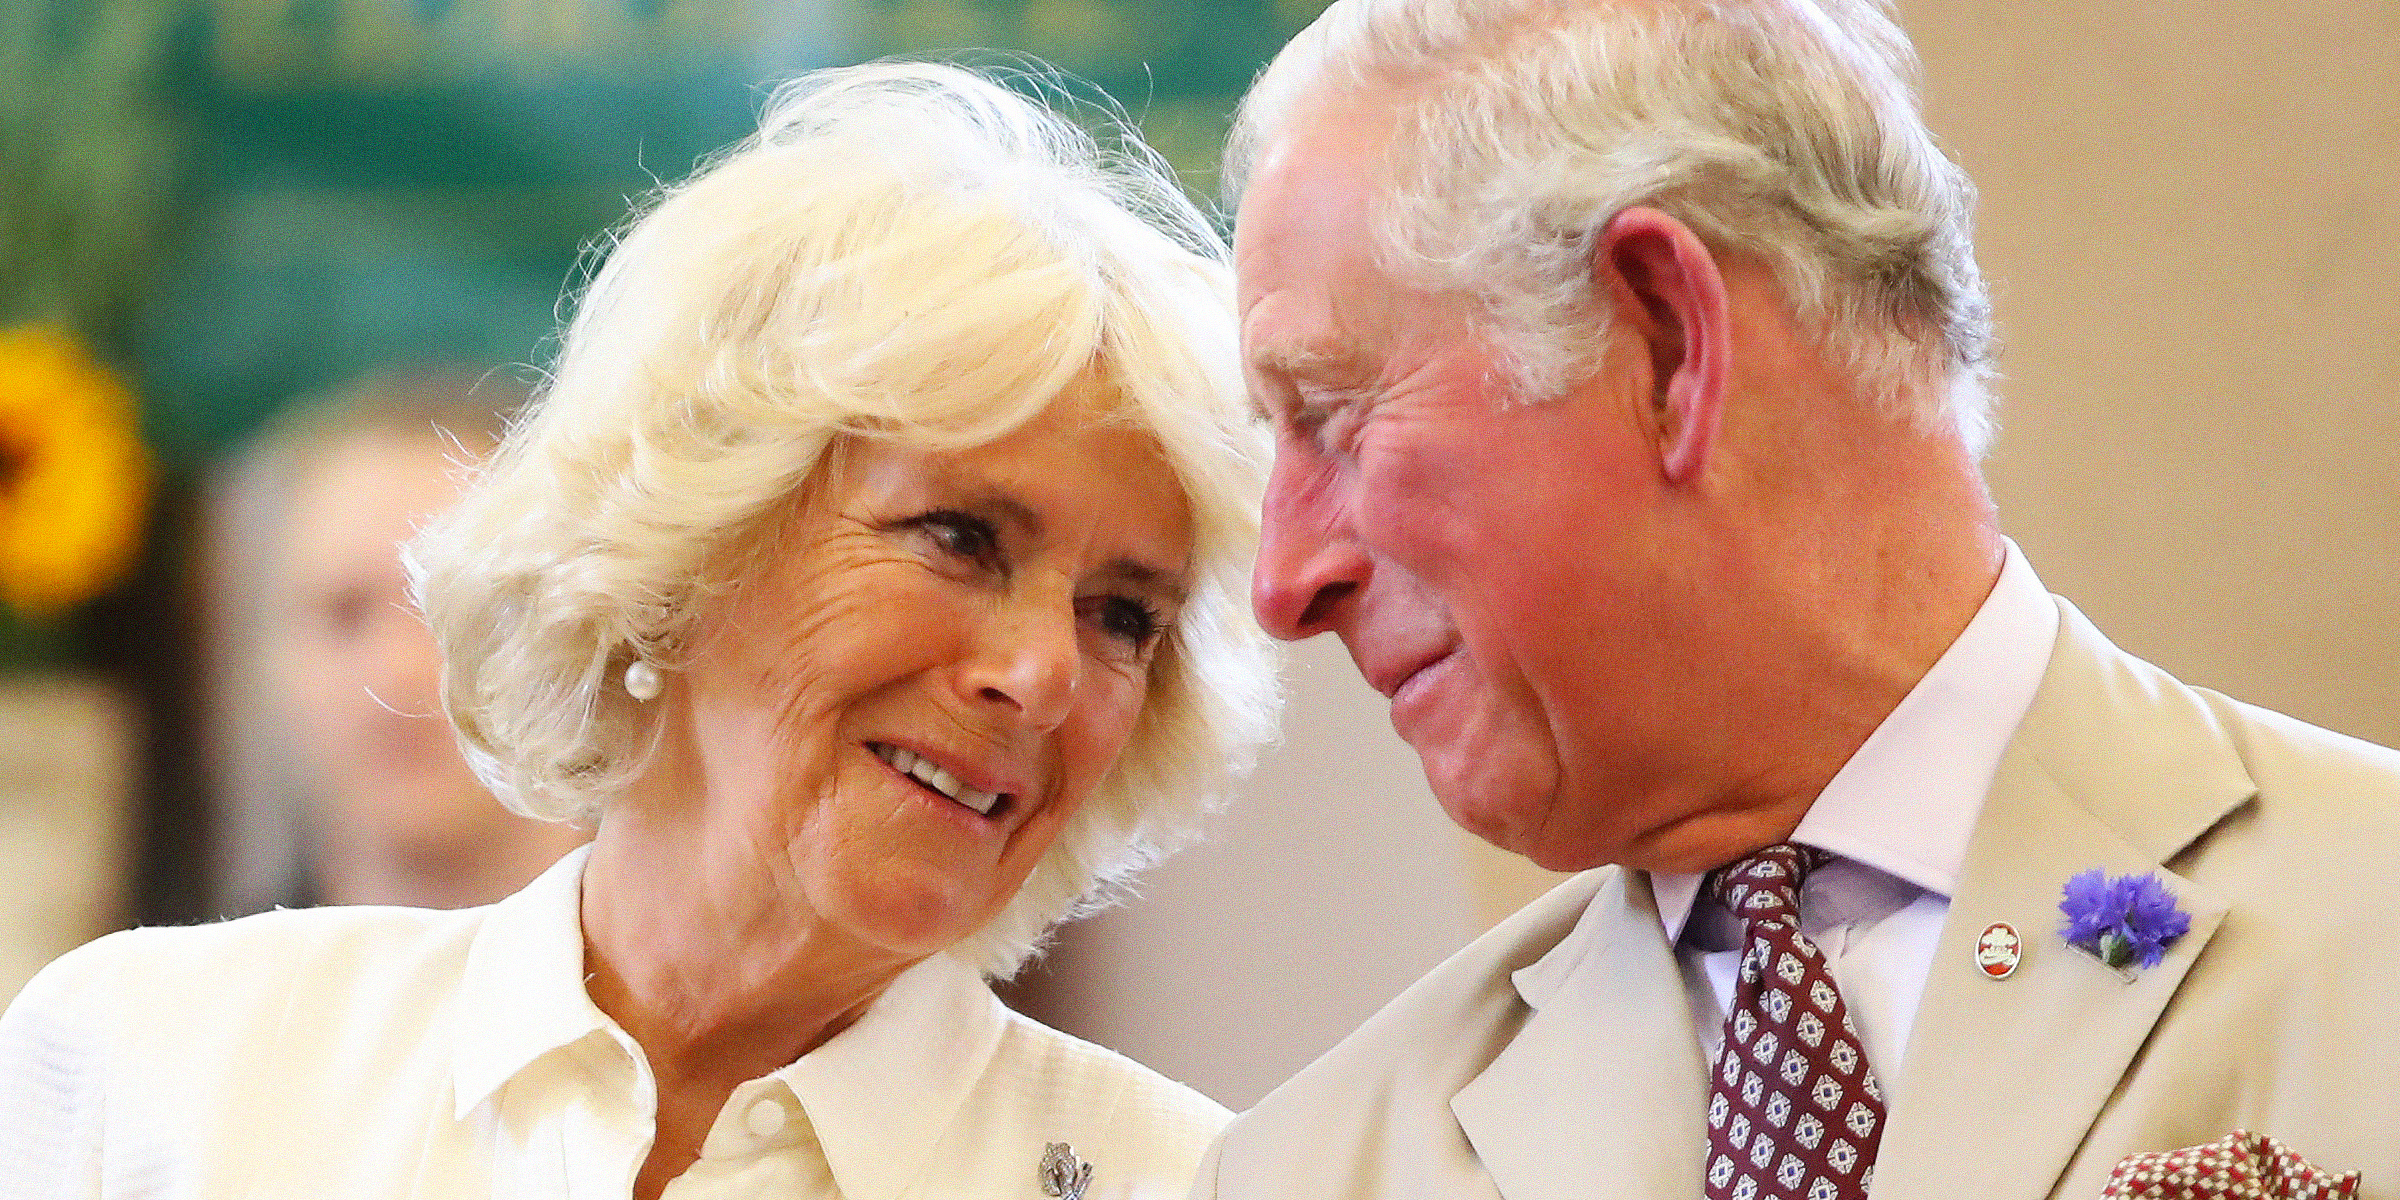 King Charles III and Queen Camilla | Source: Getty Images